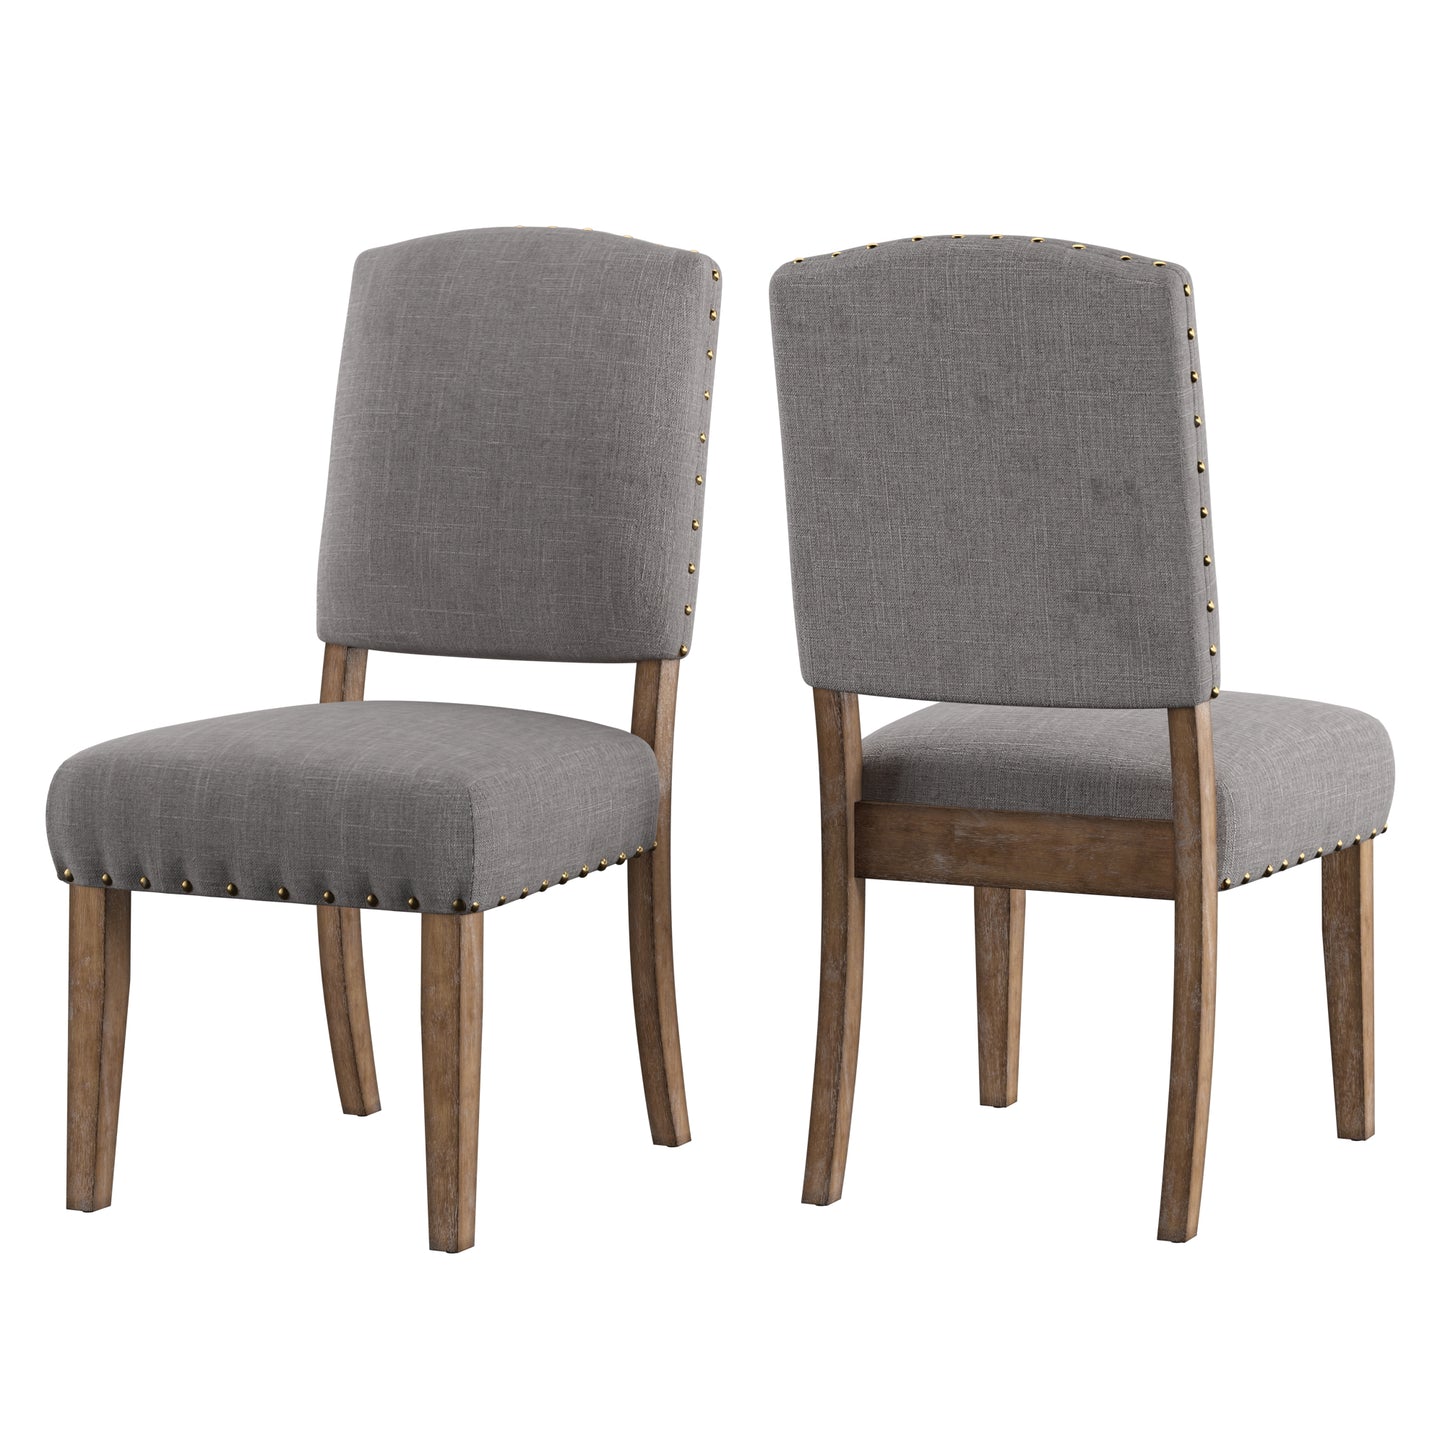 Nailhead Upholstered Dining Chairs (Set of 2) - Natural Finish, Grey Linen